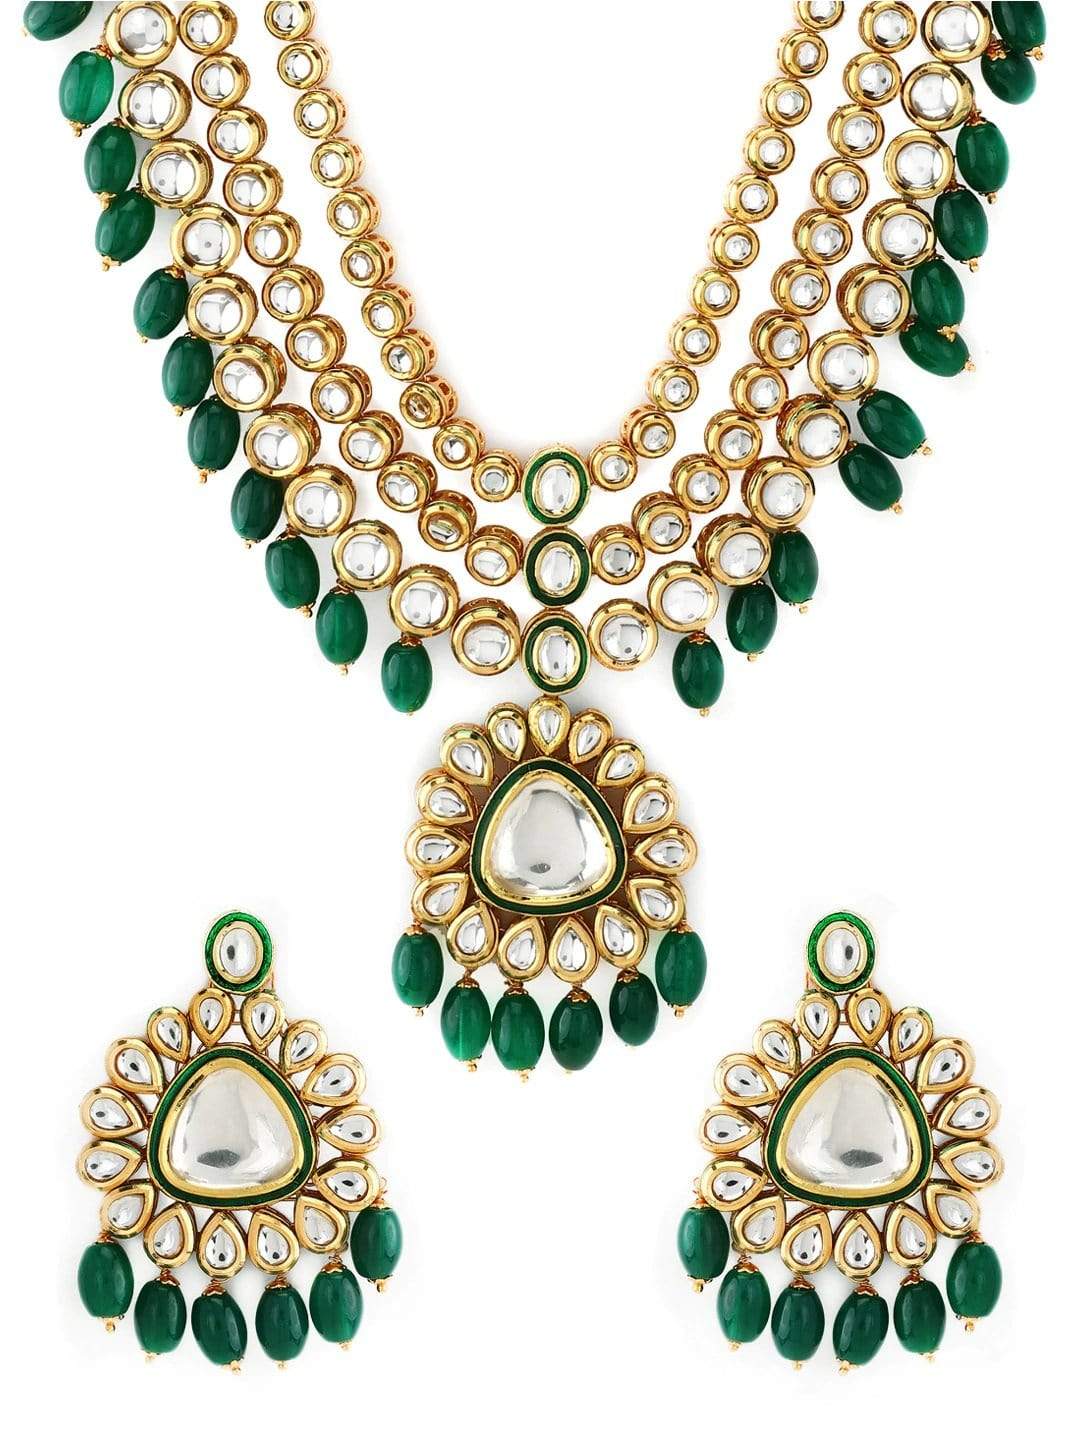 Pooja Raina in Kundan layered Necklace with Green Hangings. Necklace Set